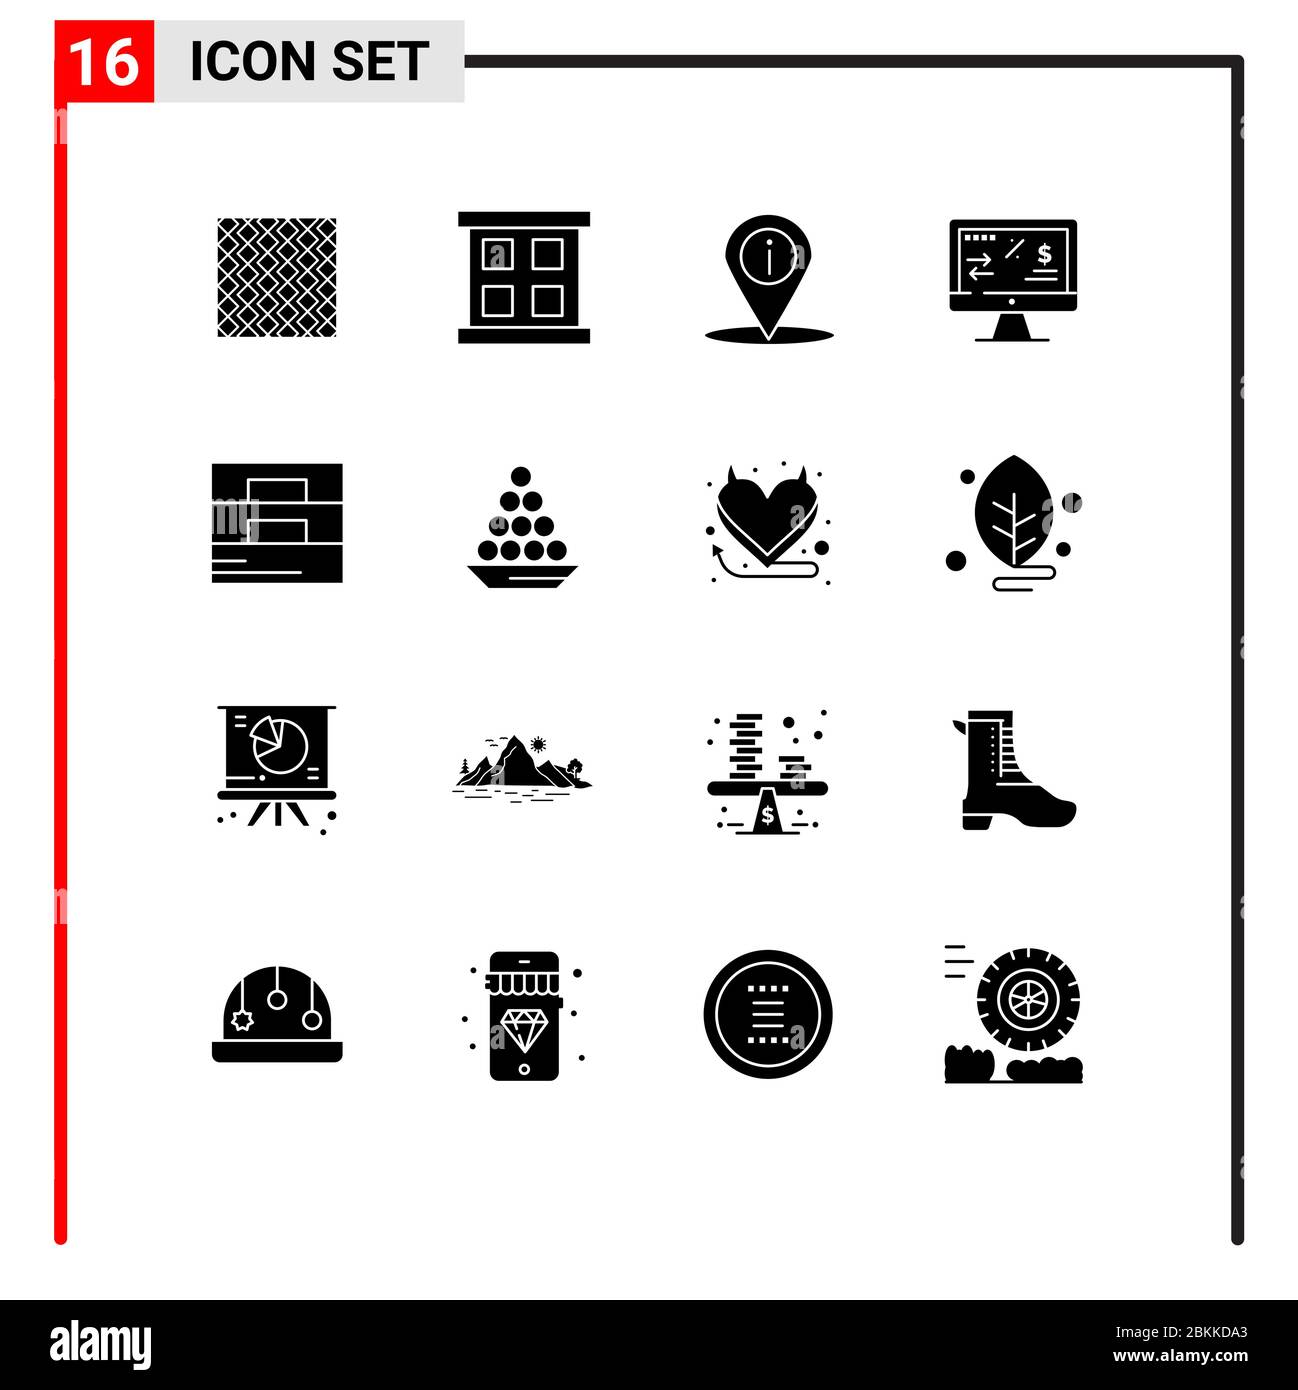 Pictogram Set of 16 Simple Solid Glyphs of computer, finance, window, tax regulation, place Editable Vector Design Elements Stock Vector